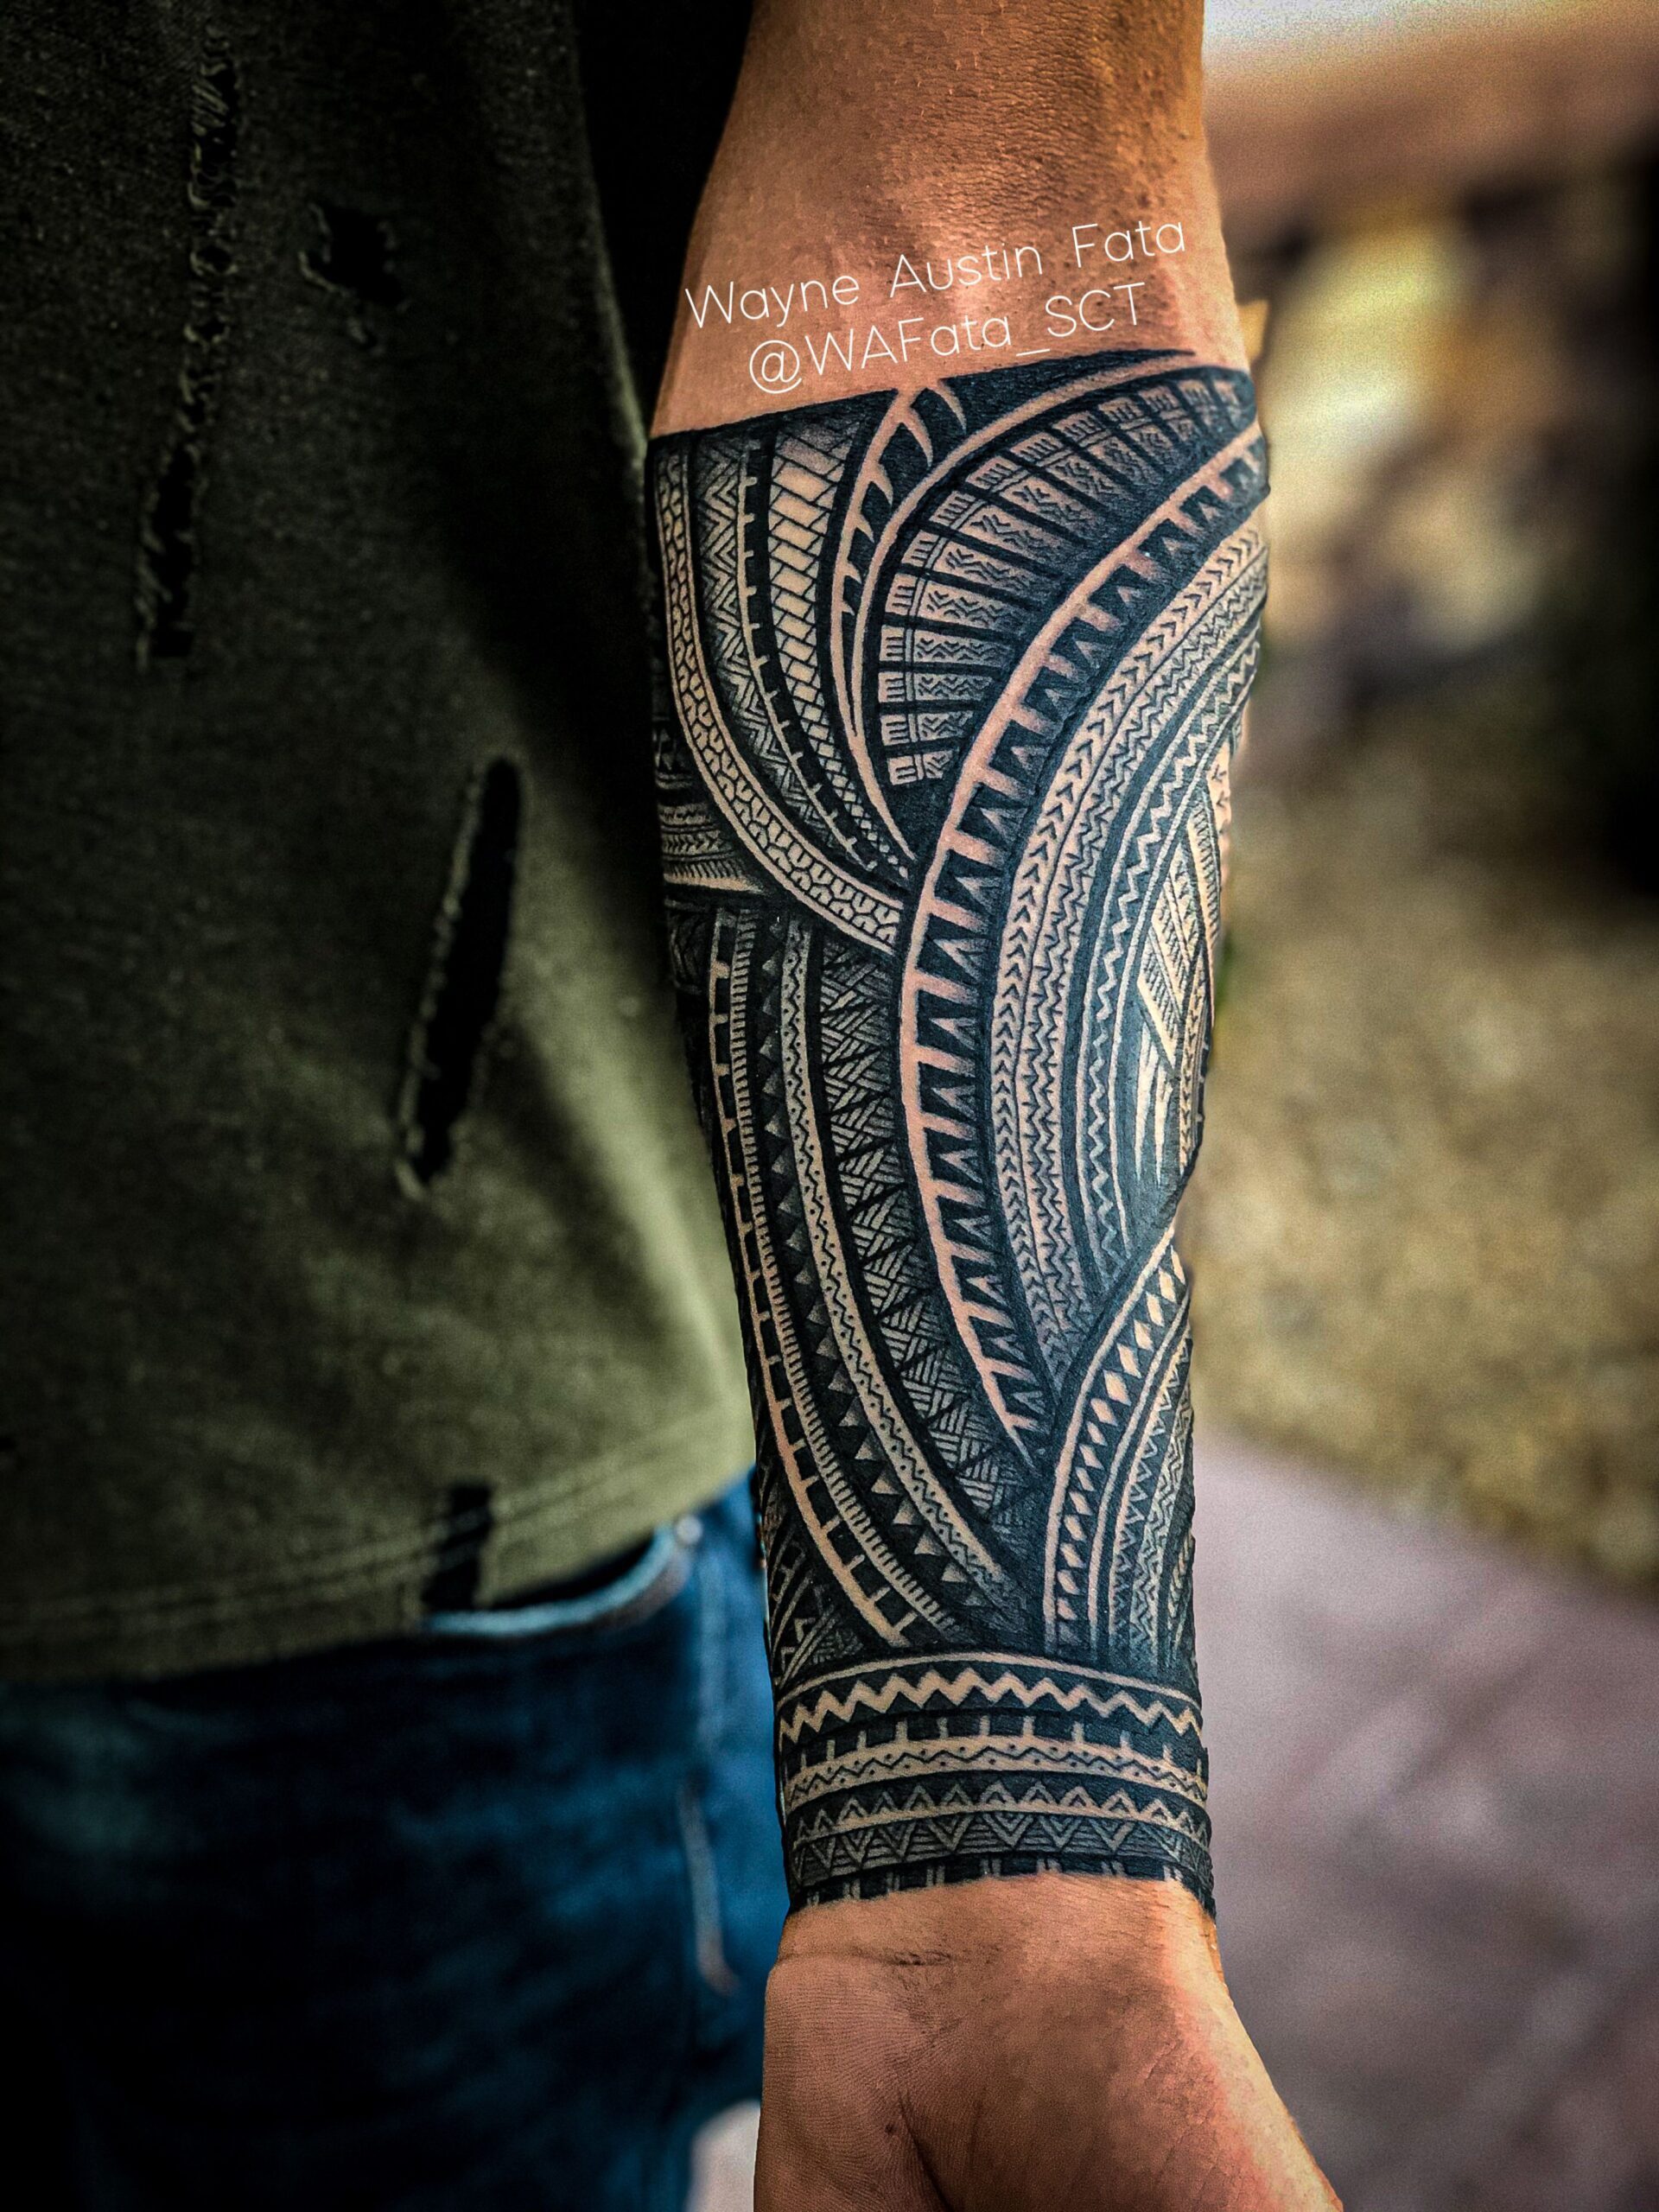 199+ Arm Tattoo Ideas For Men That Are Seriously Cool